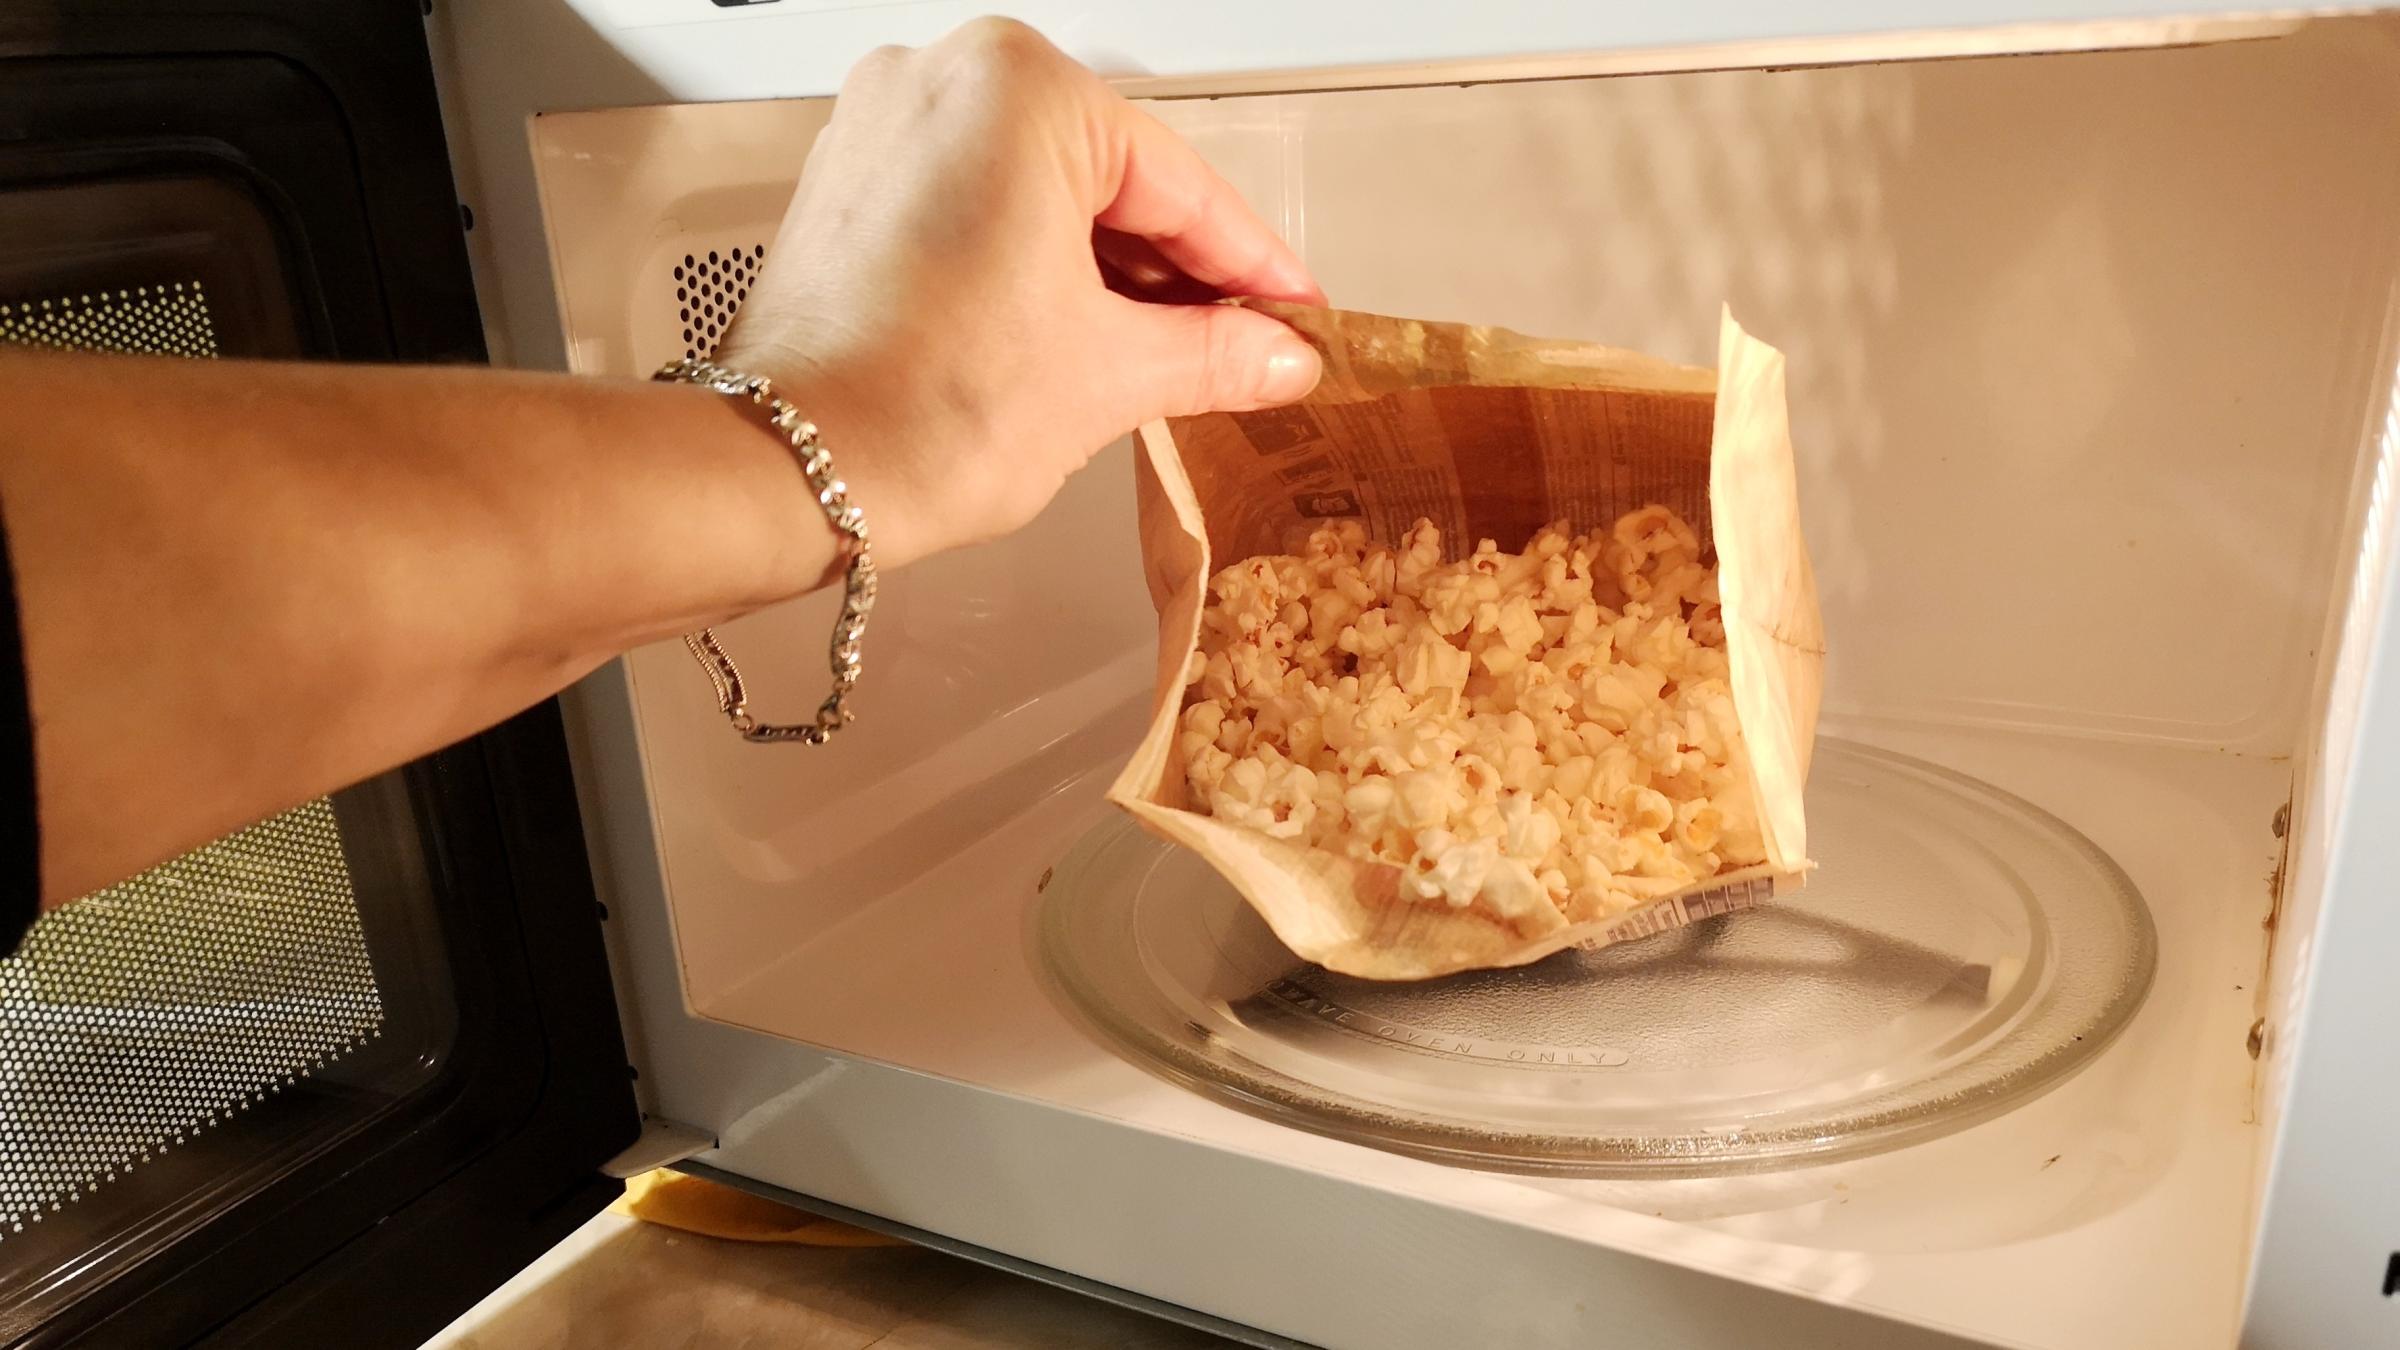 We've Been Heating Up Microwave Popcorn Wrong This Whole Time